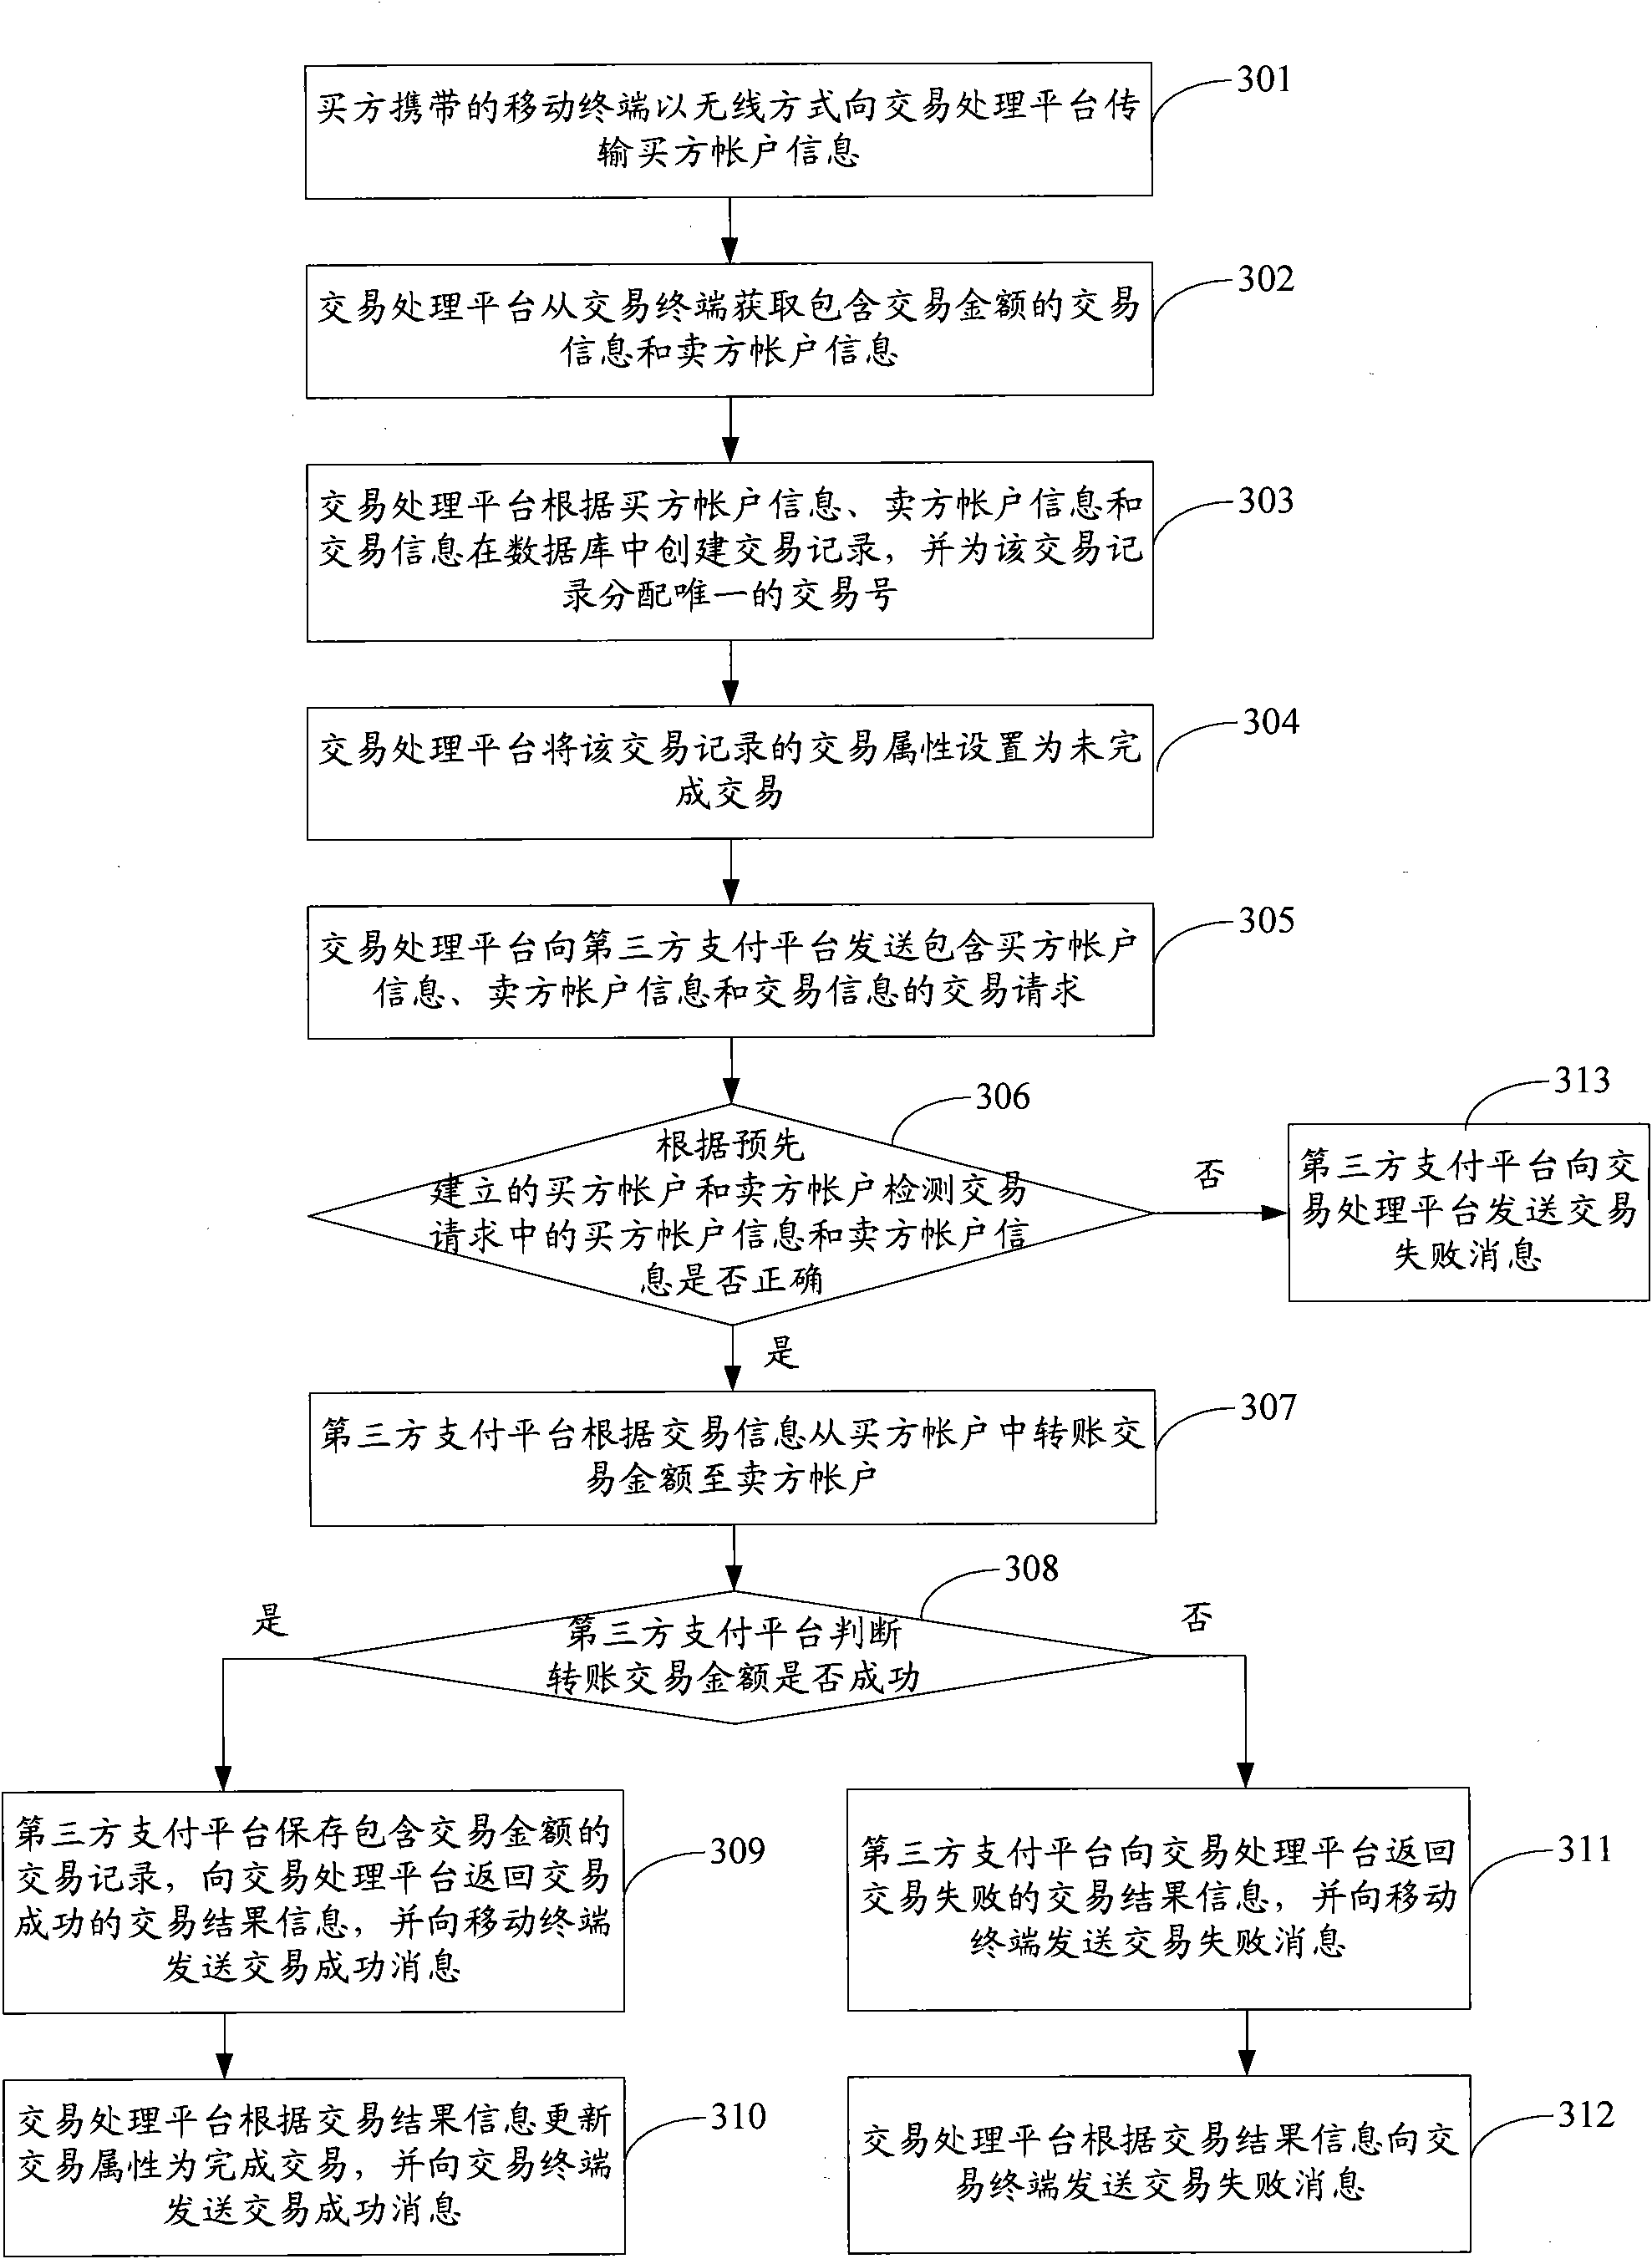 Method and system for processing transaction data, transaction processing system and third-party payment system